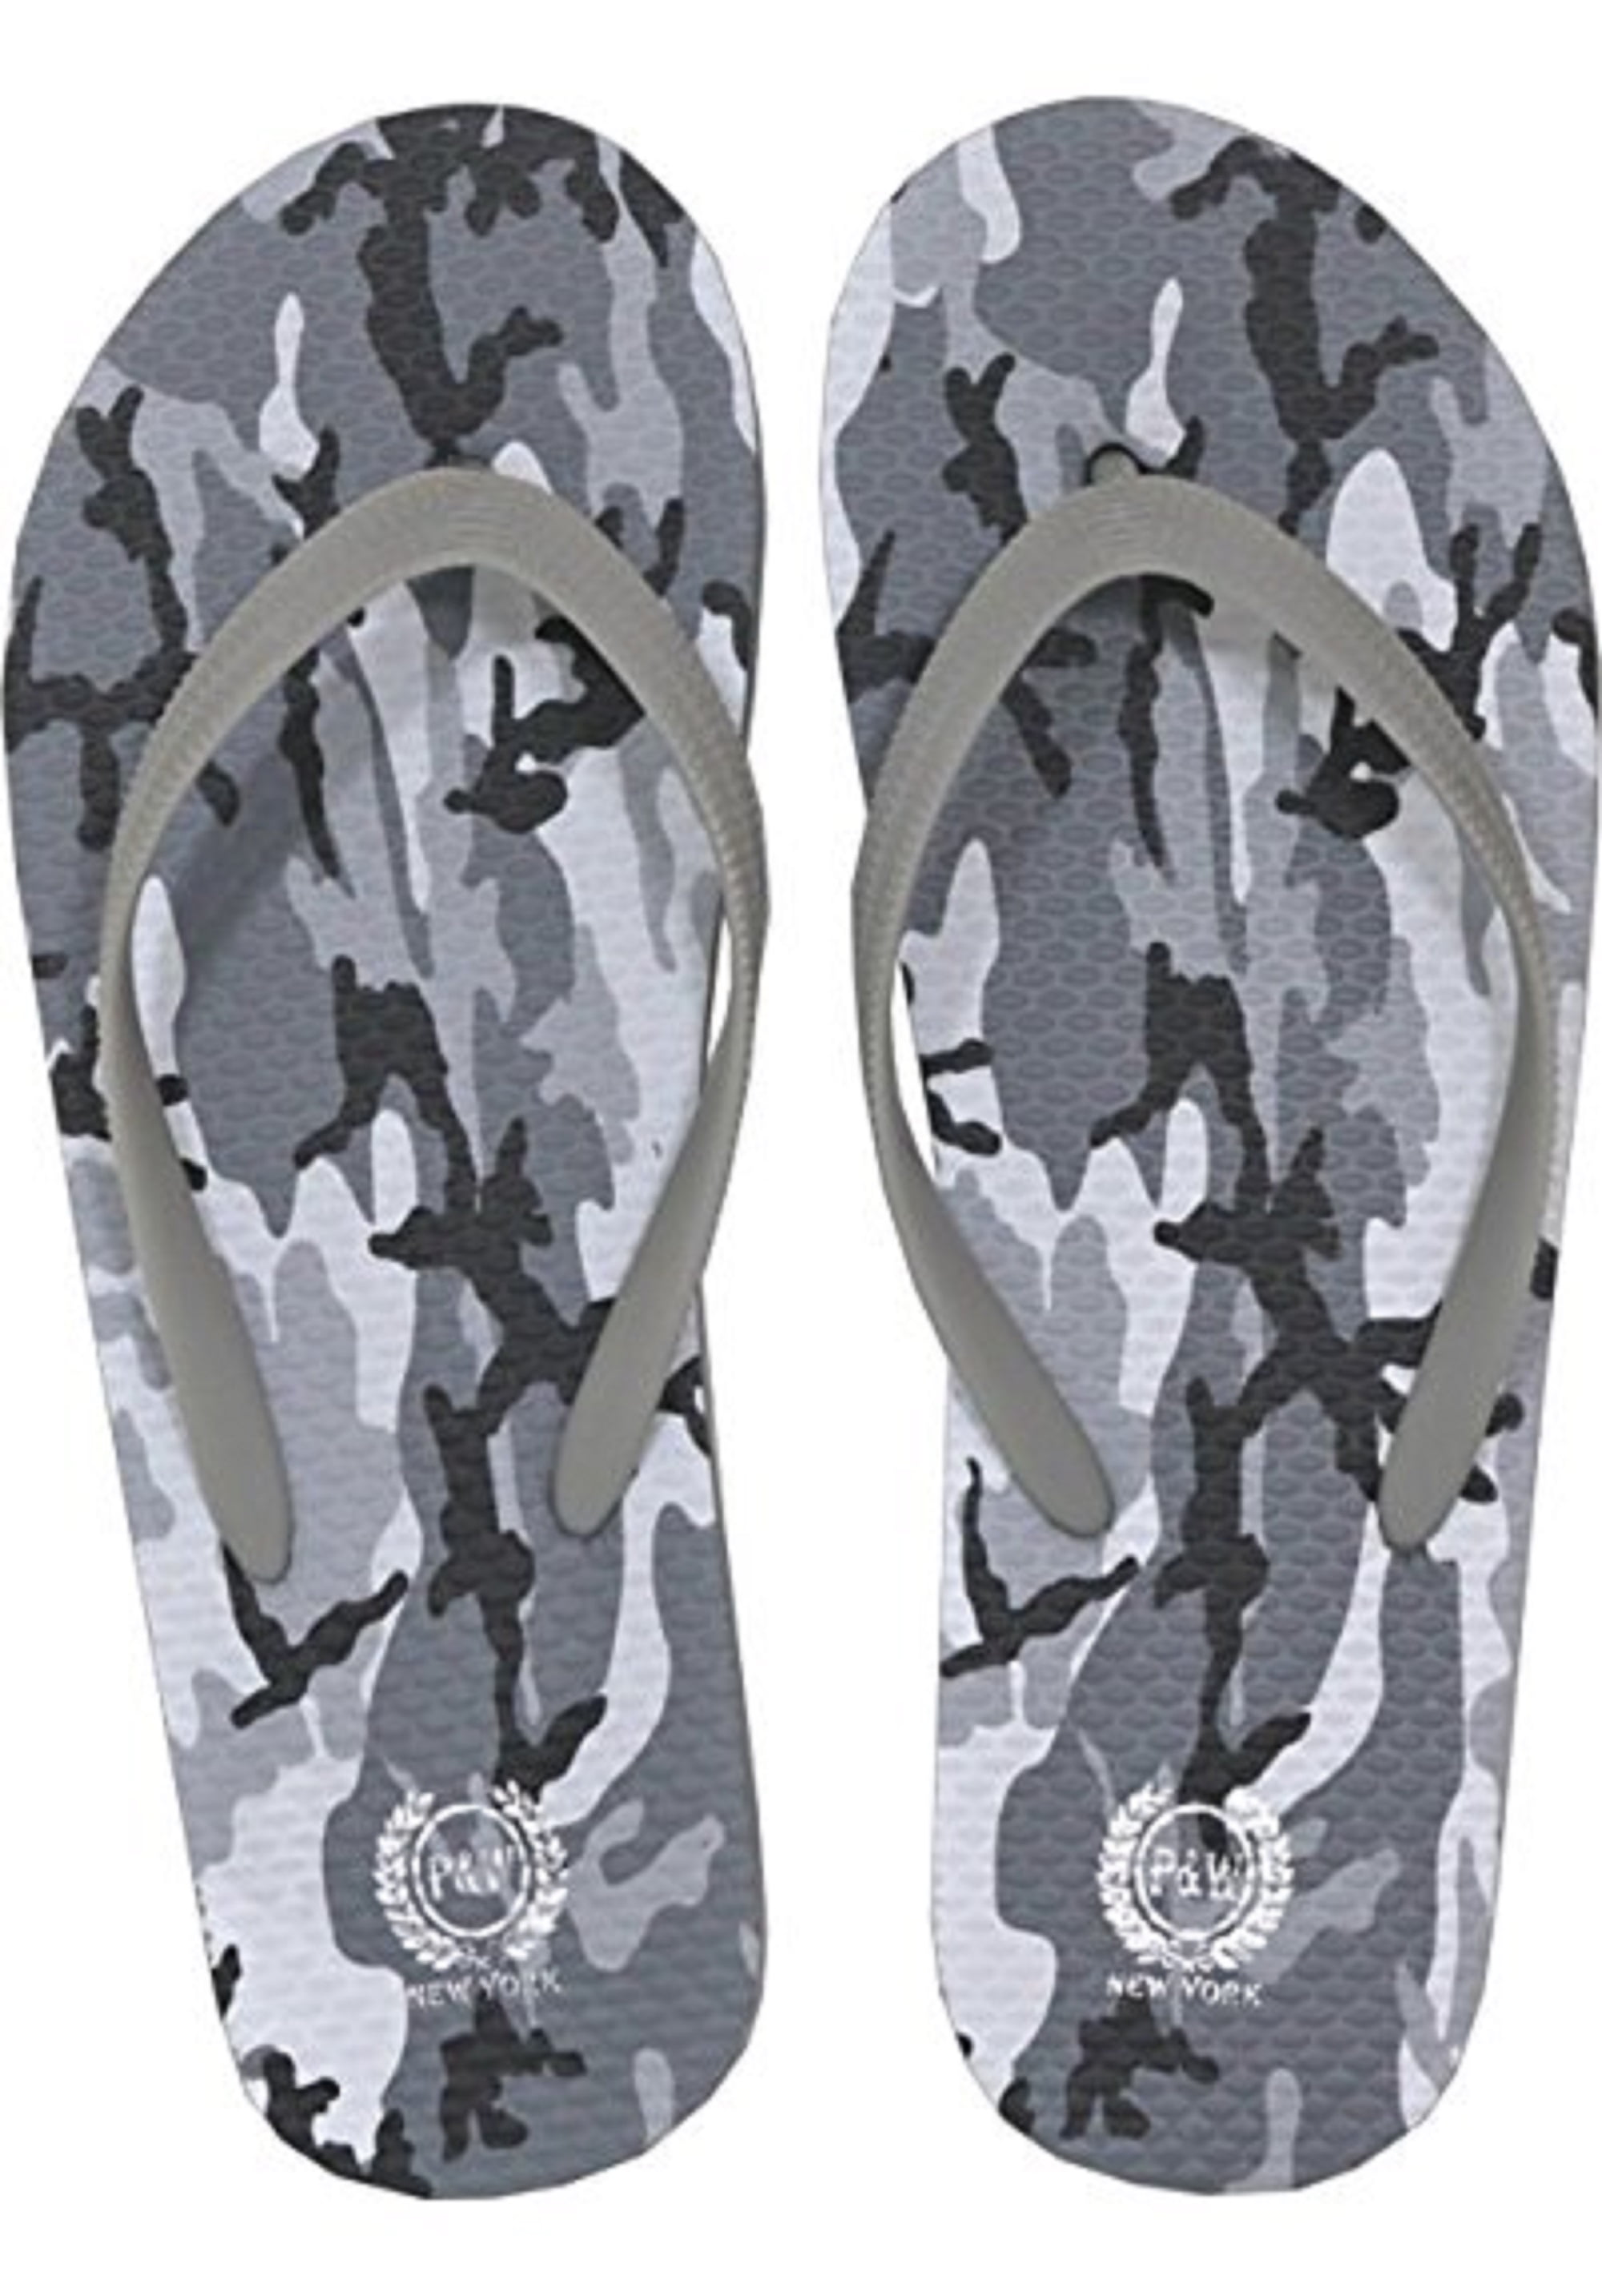 Digital Camo Camouflage Graphic Printed Beach Slippers Sandals Flip Flops